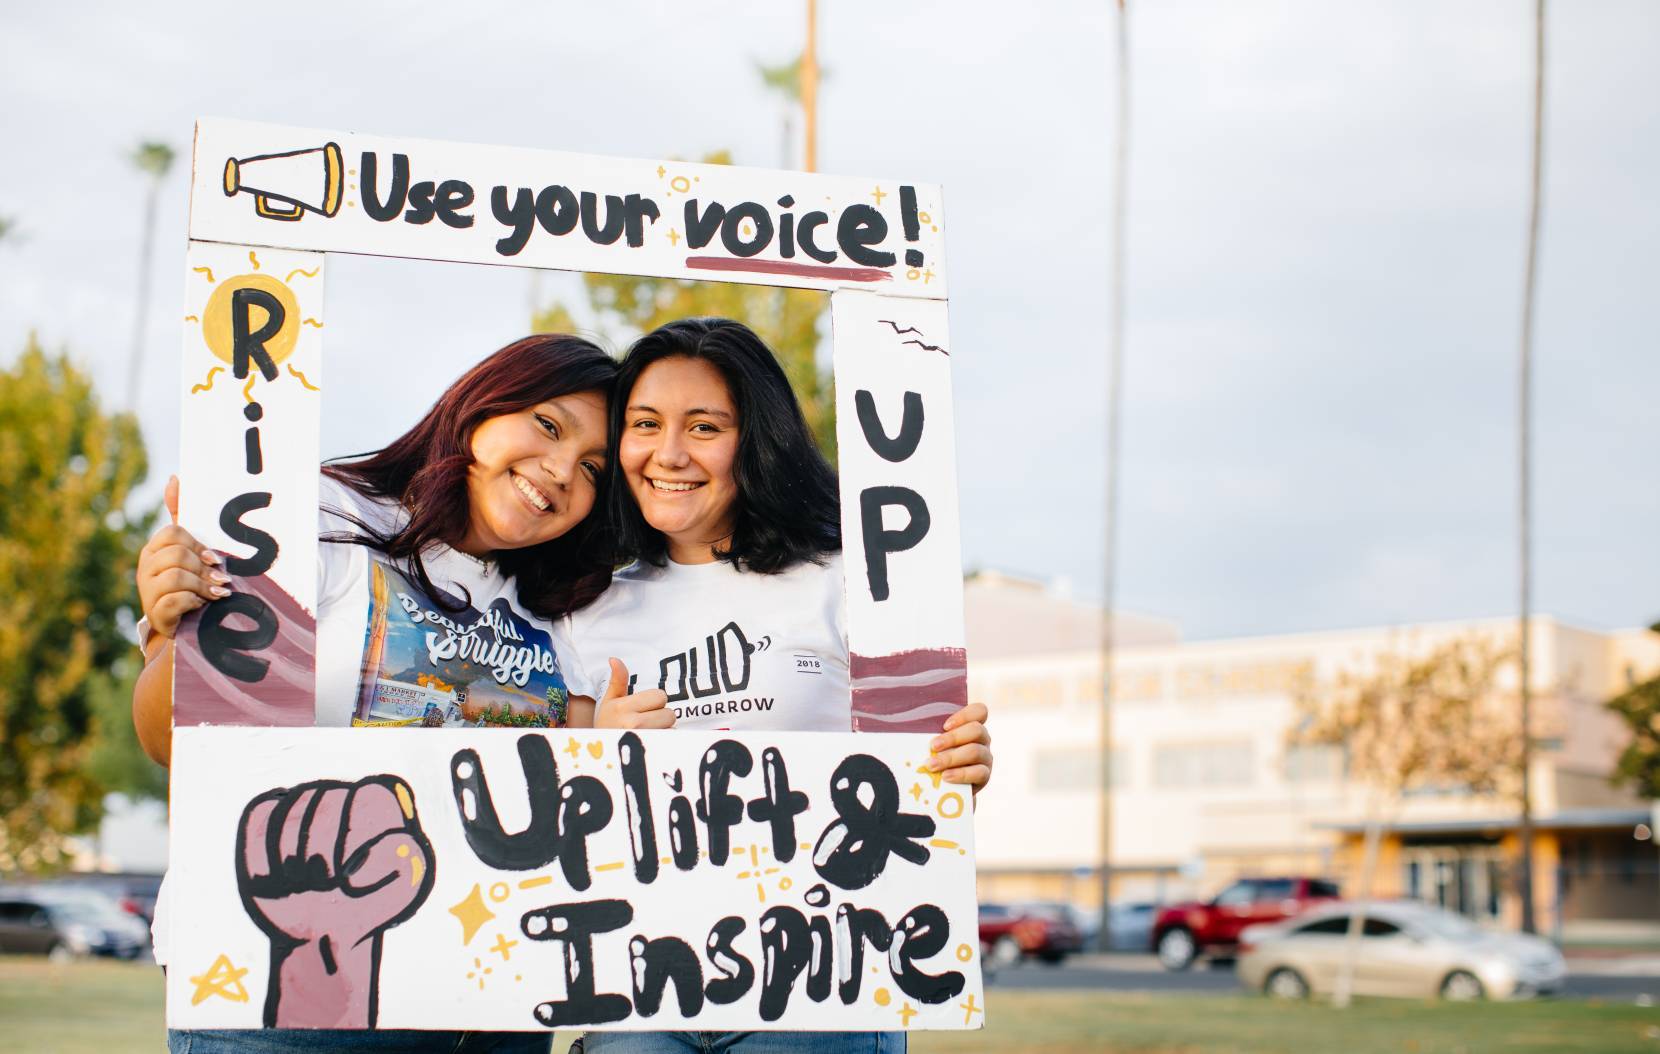 Two young women in an Use Your Voice Uplift and Inspire cardboard frame